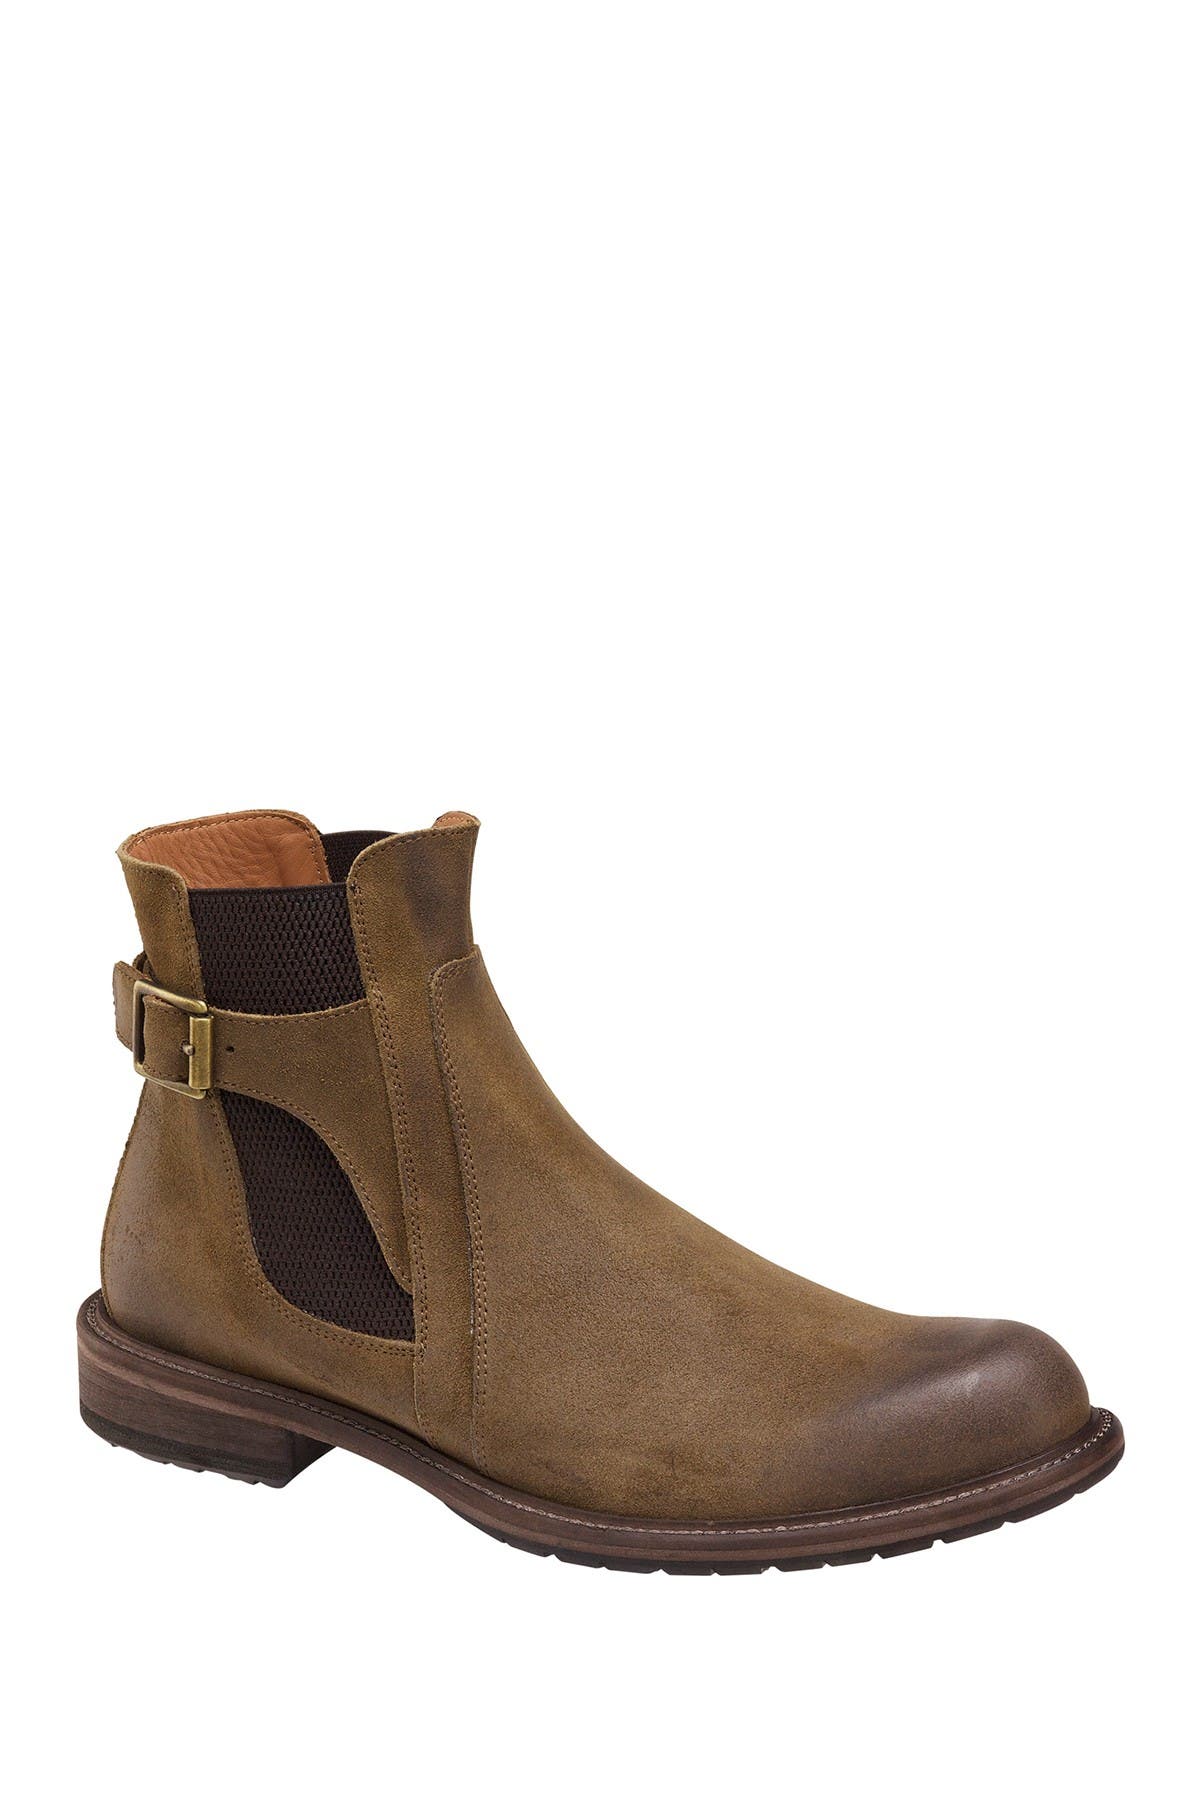 johnston and murphy winter boots